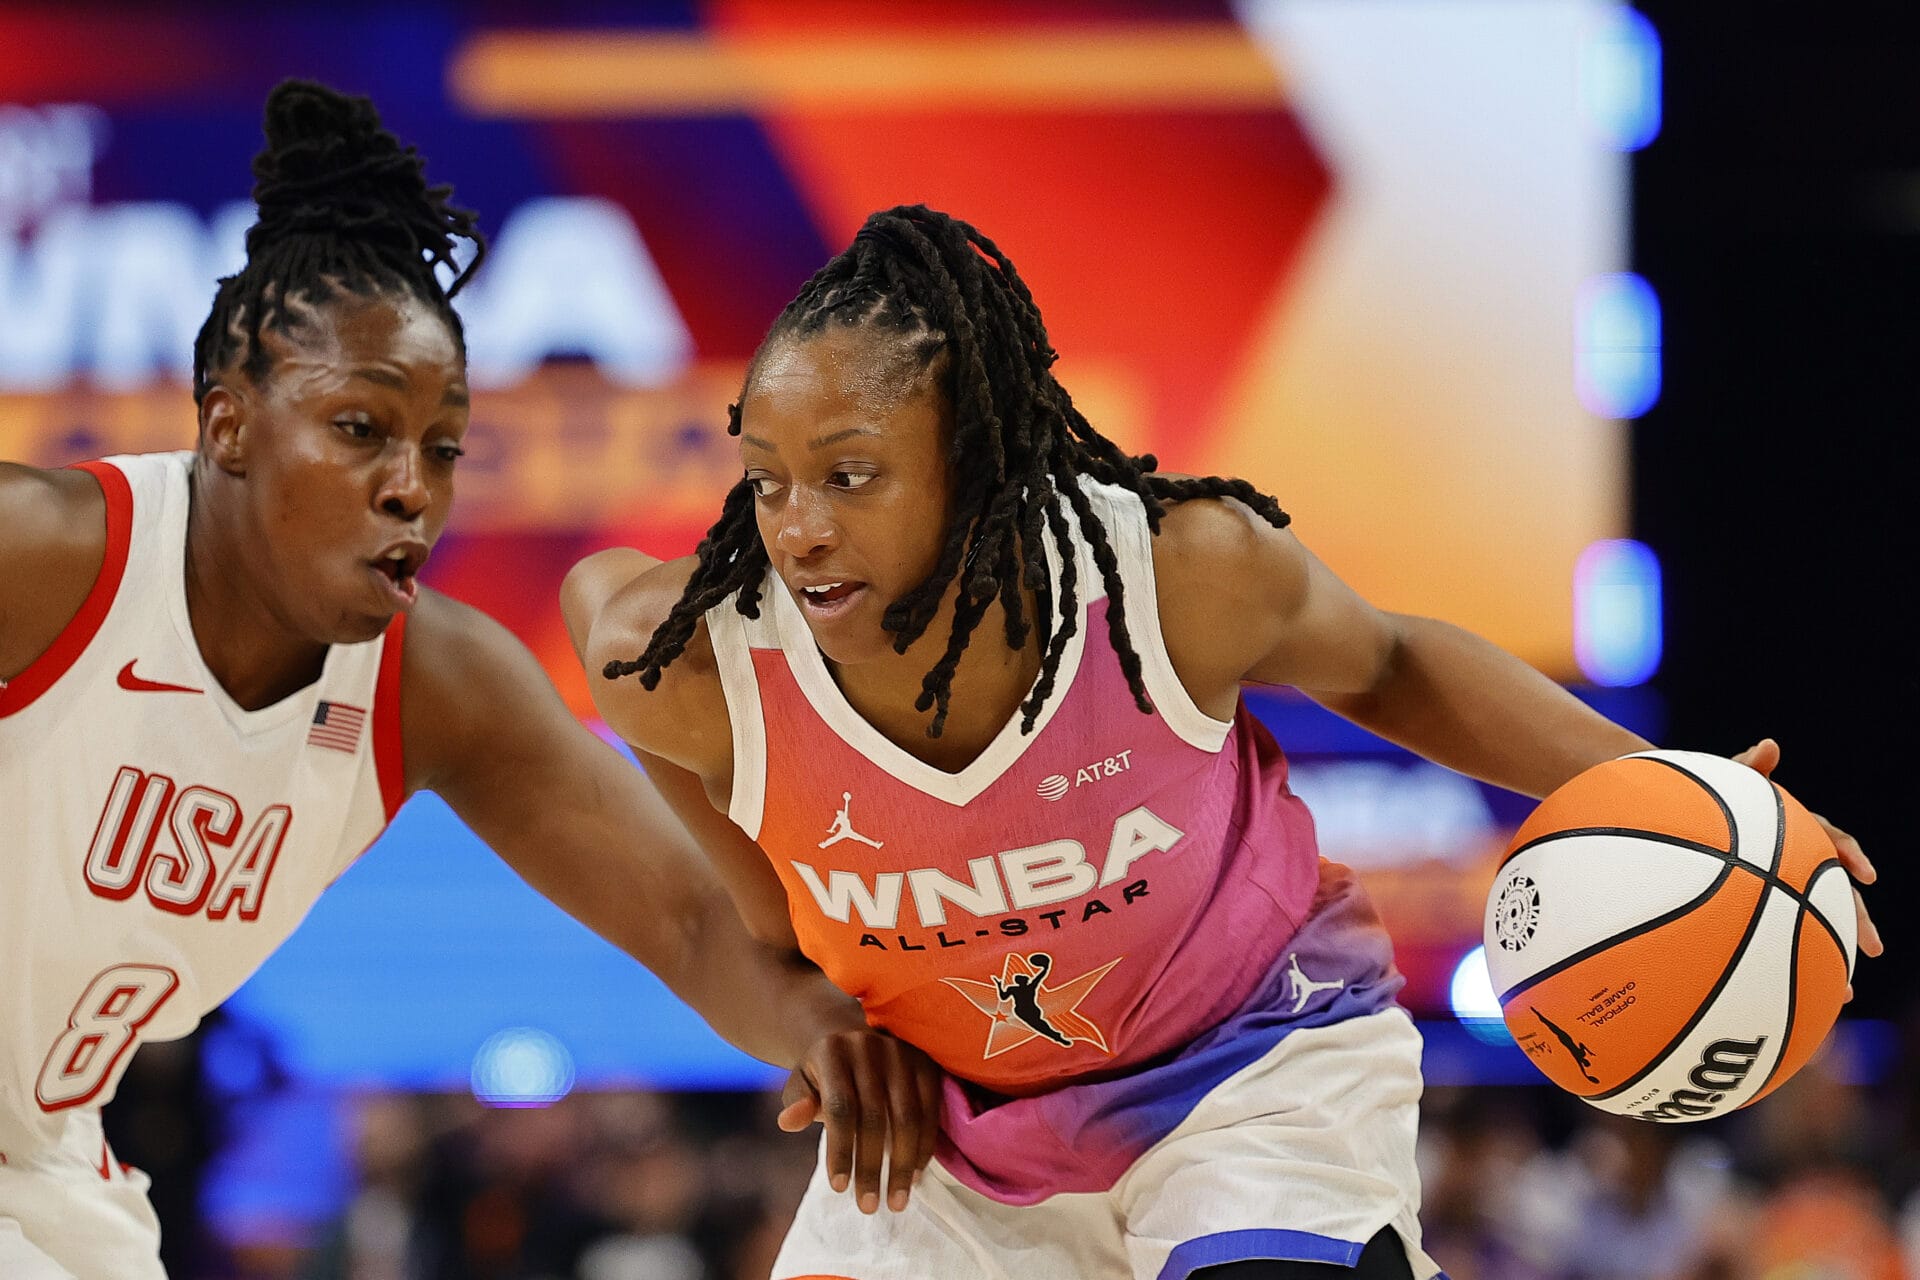 PHOENIX, ARIZONA - JULY 20: Kelsey Mitchell #0 of Team WNBA works against Chelsea Gray #8 of Team USA during the first quarter of the 2024 WNBA All Star Game at Footprint Center on July 20, 2024 in Phoenix, Arizona. (Photo by Alex Slitz/Getty Images)